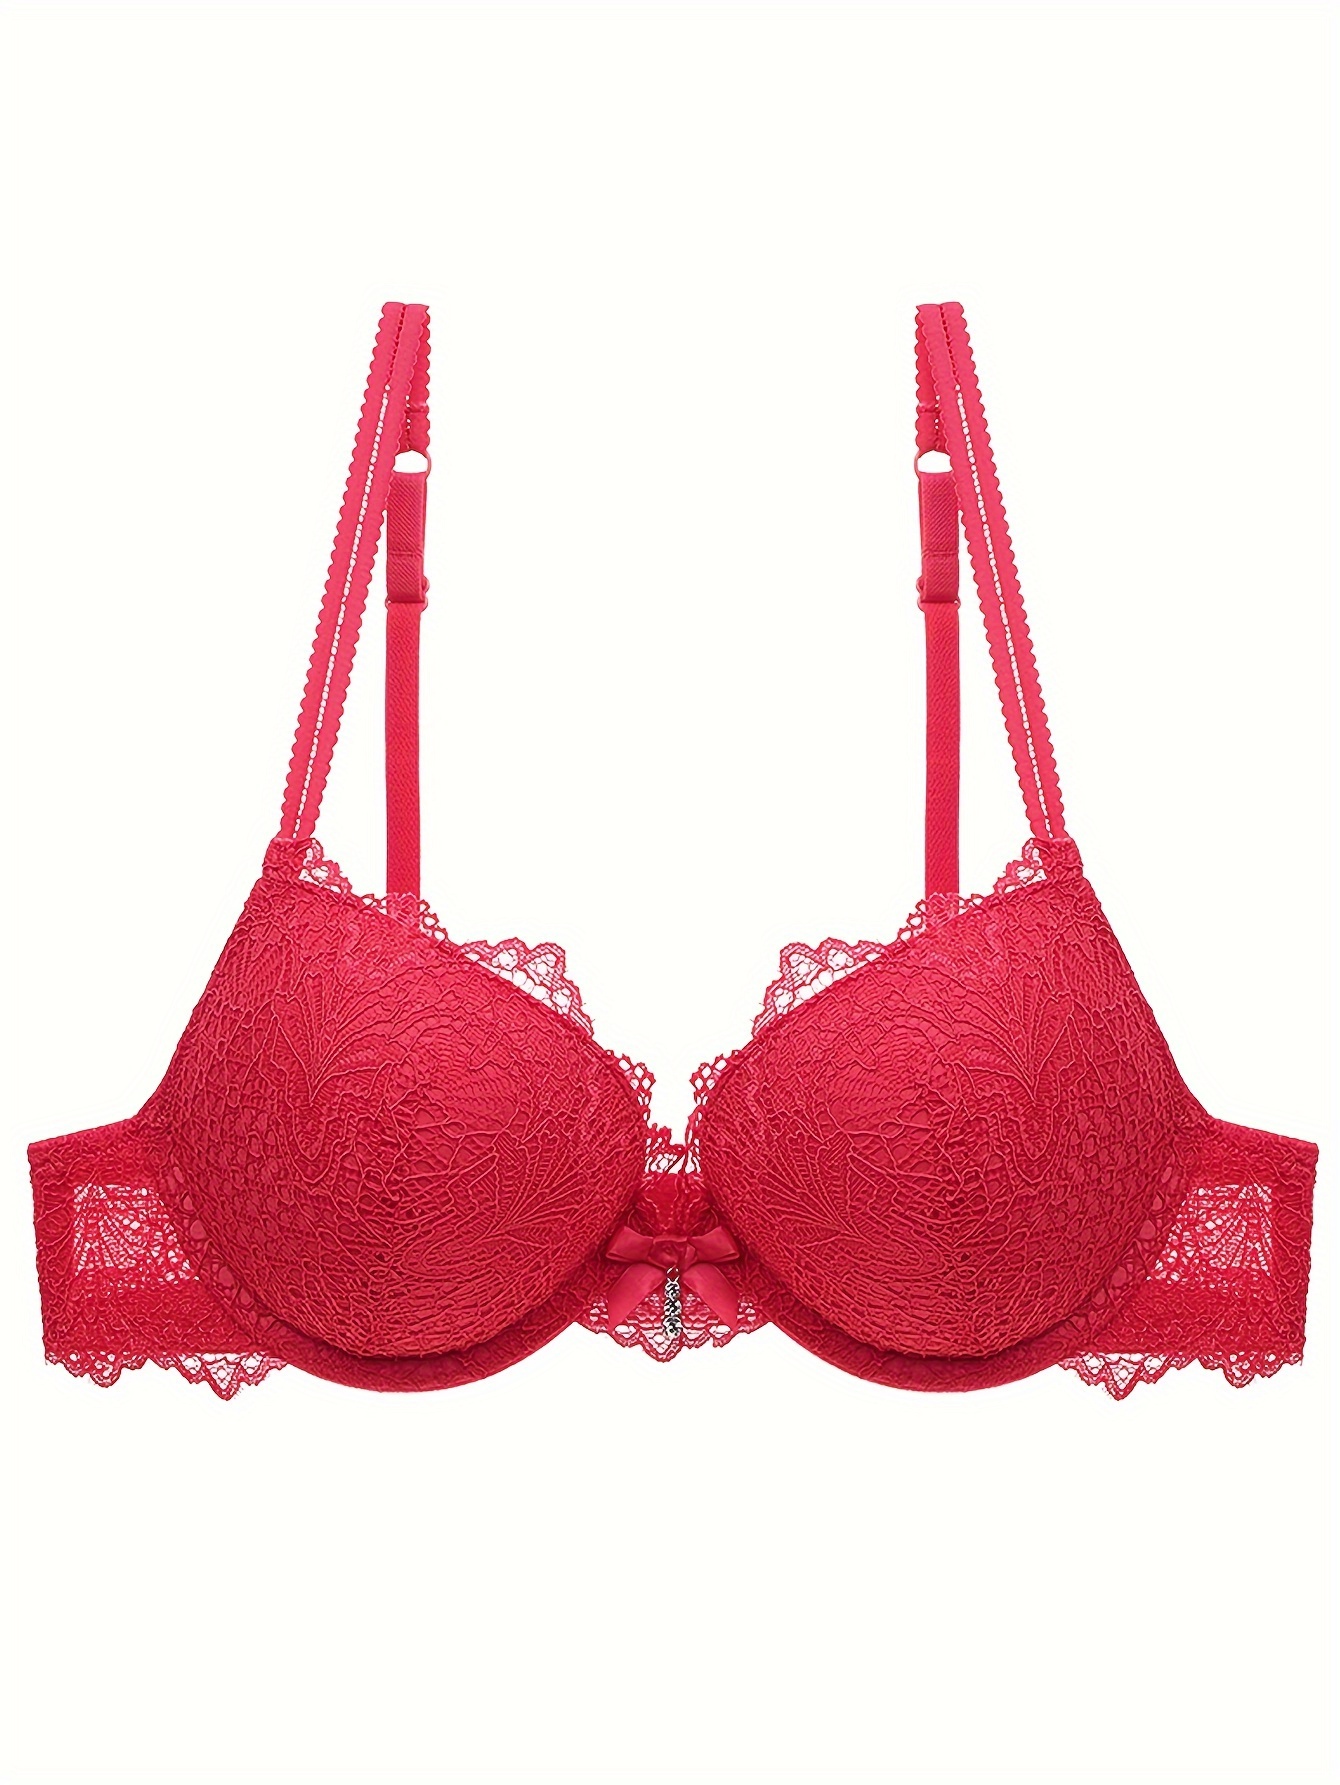 Victoria Secret push-up bra size 36C. Red and black lace with a bow tie.